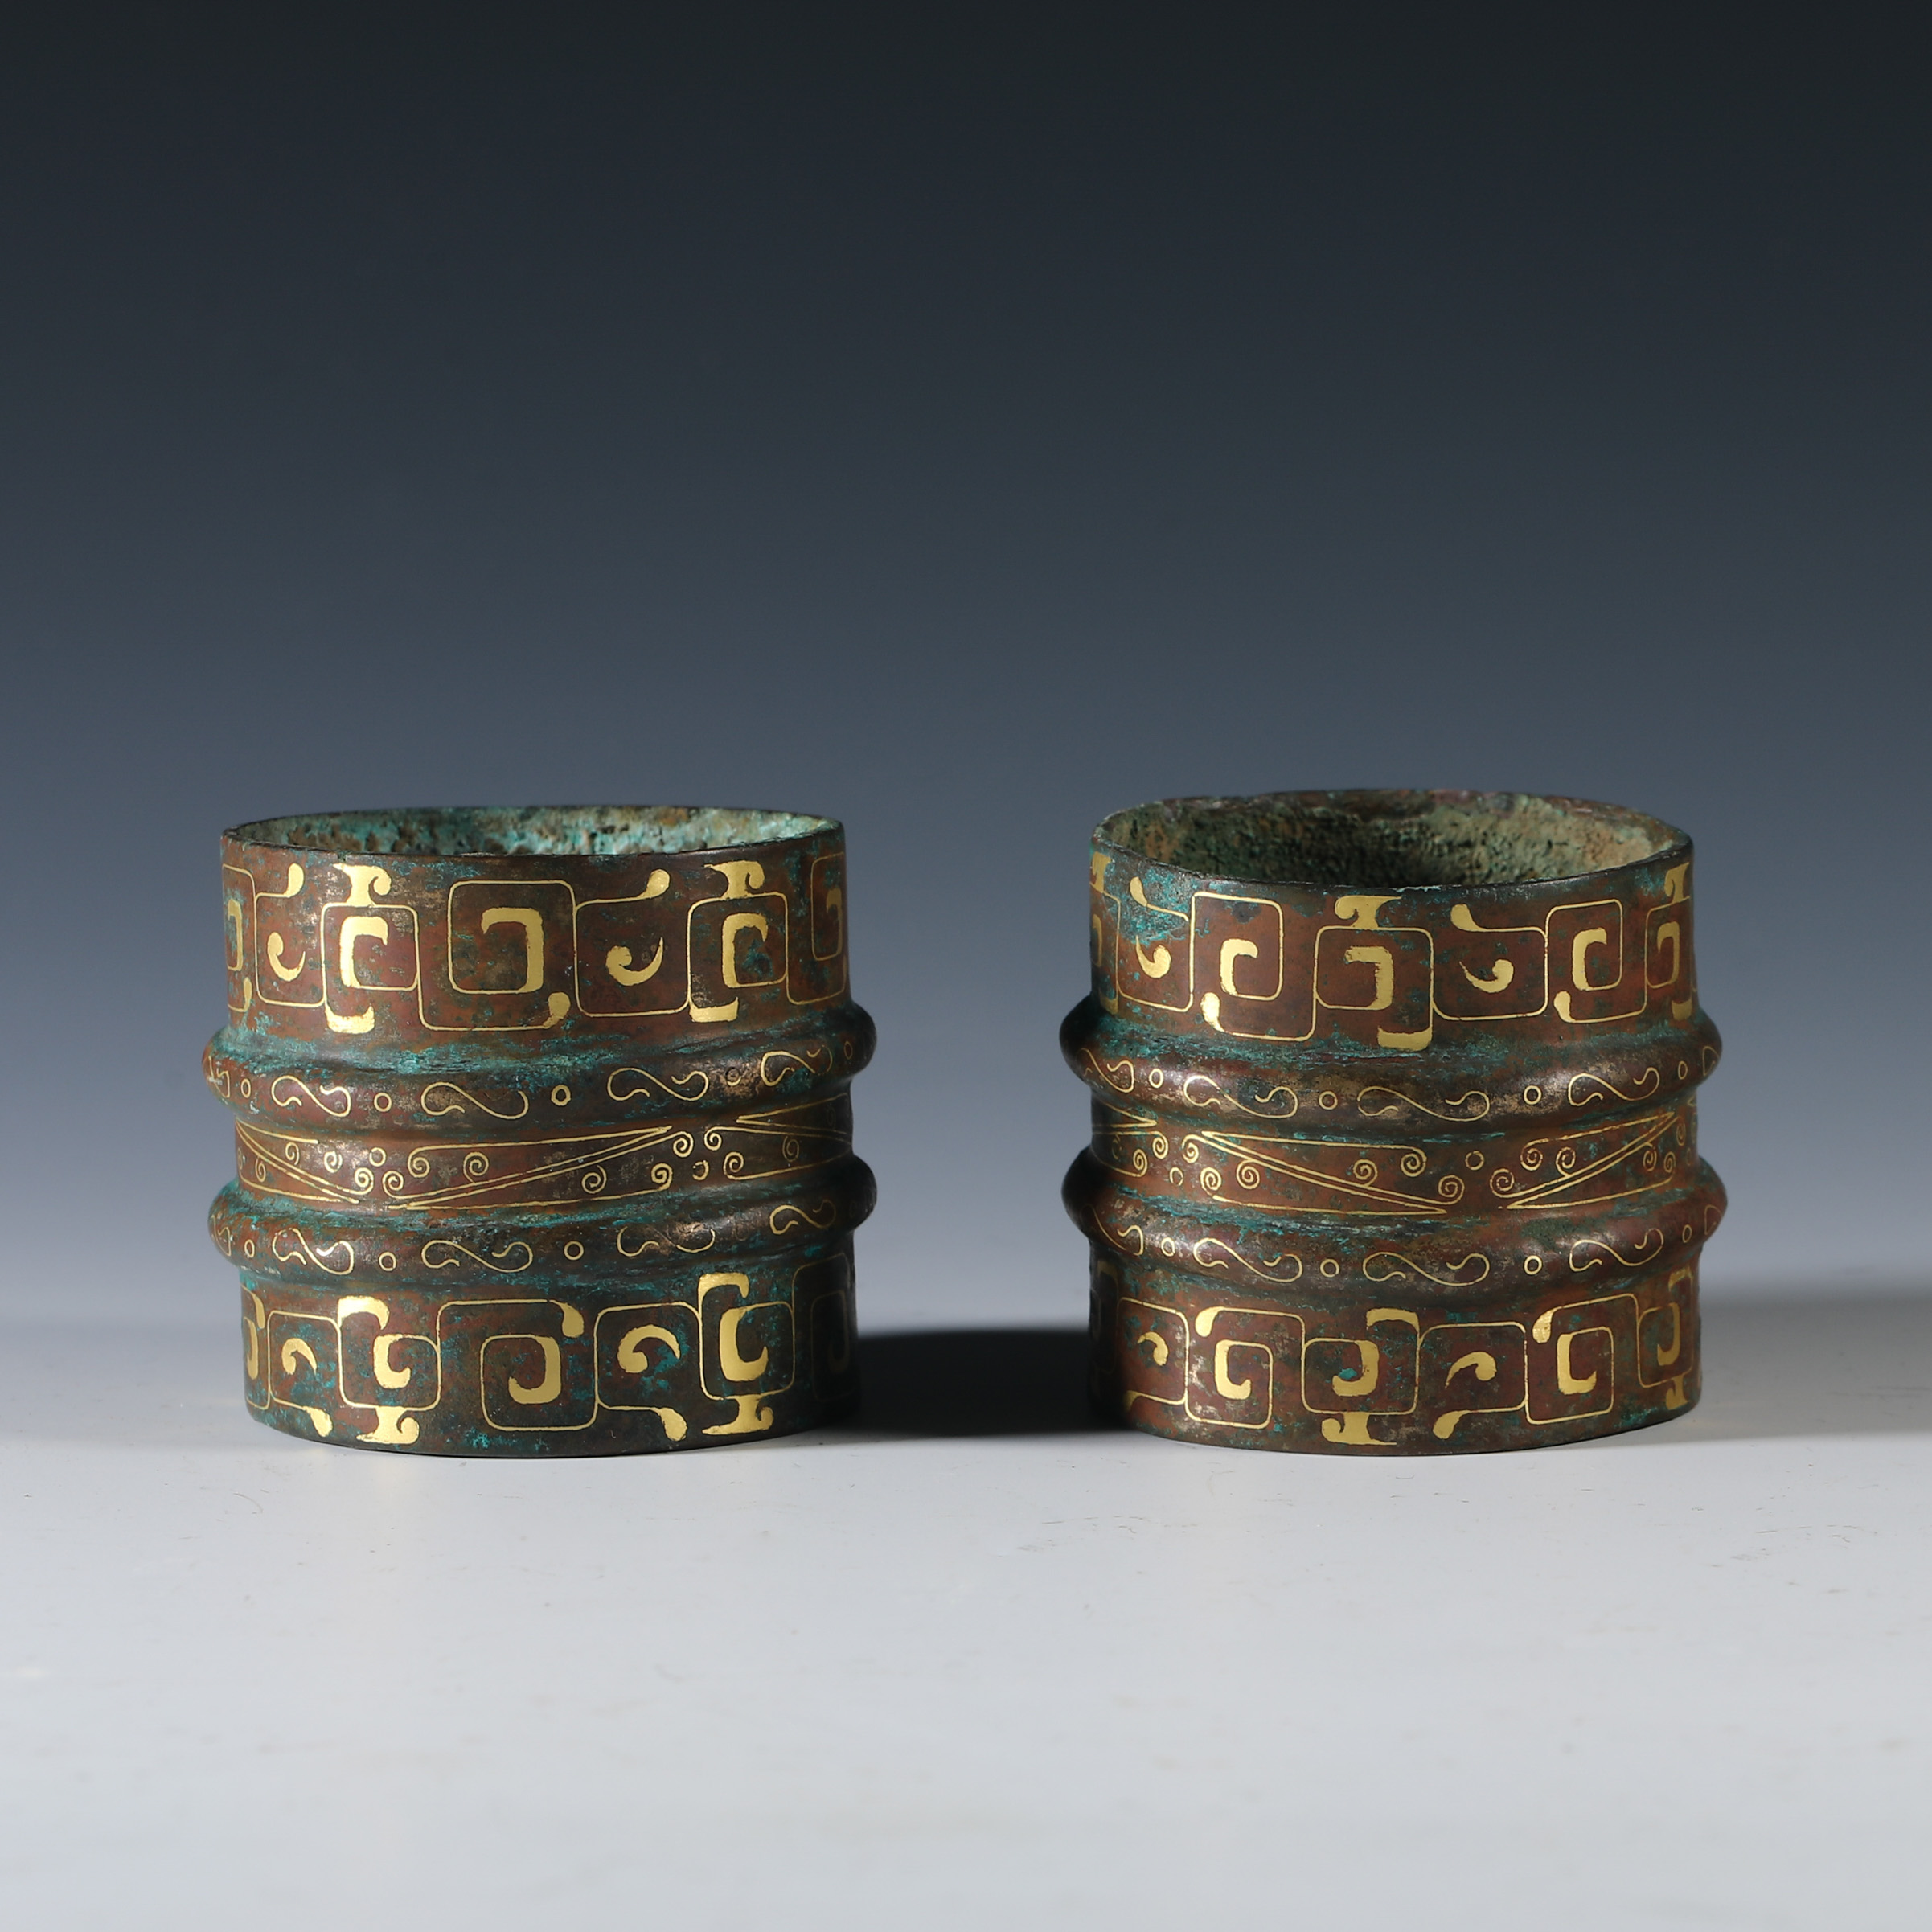 A group of copper and gold components  from the Han dynasty 